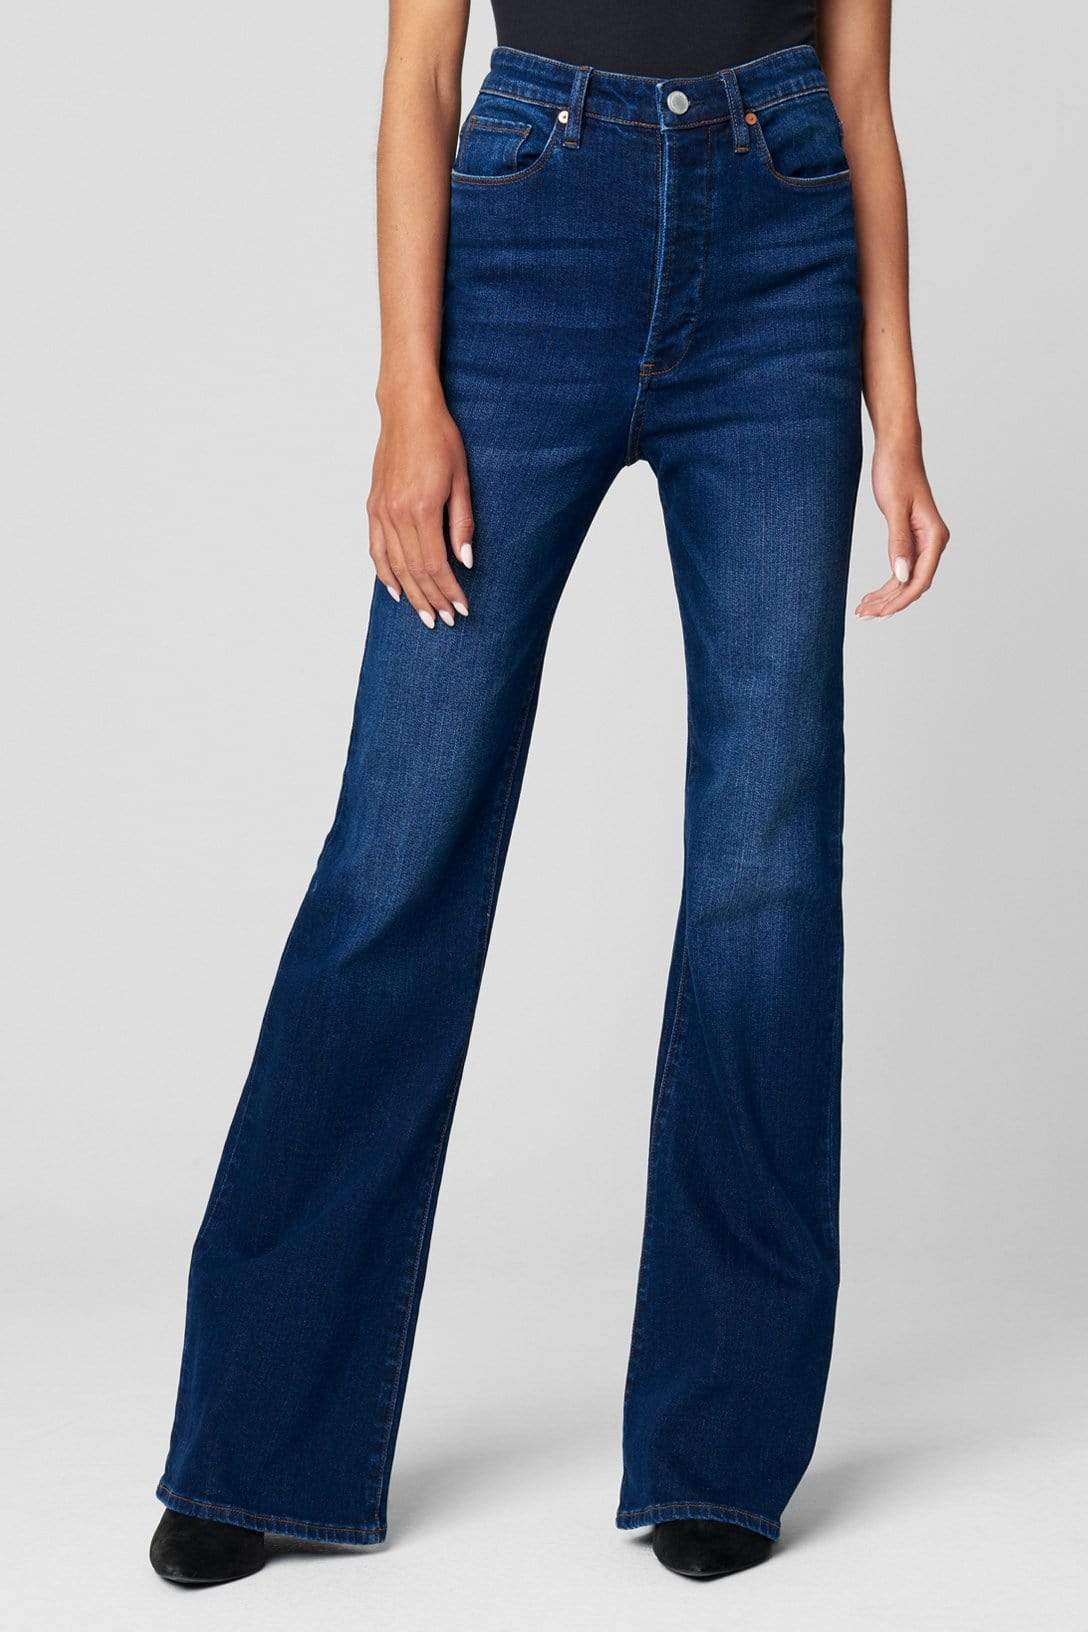 Dare To Dream Flare Denim Jean, Flare Denim by Blank NYC | LIT Boutique